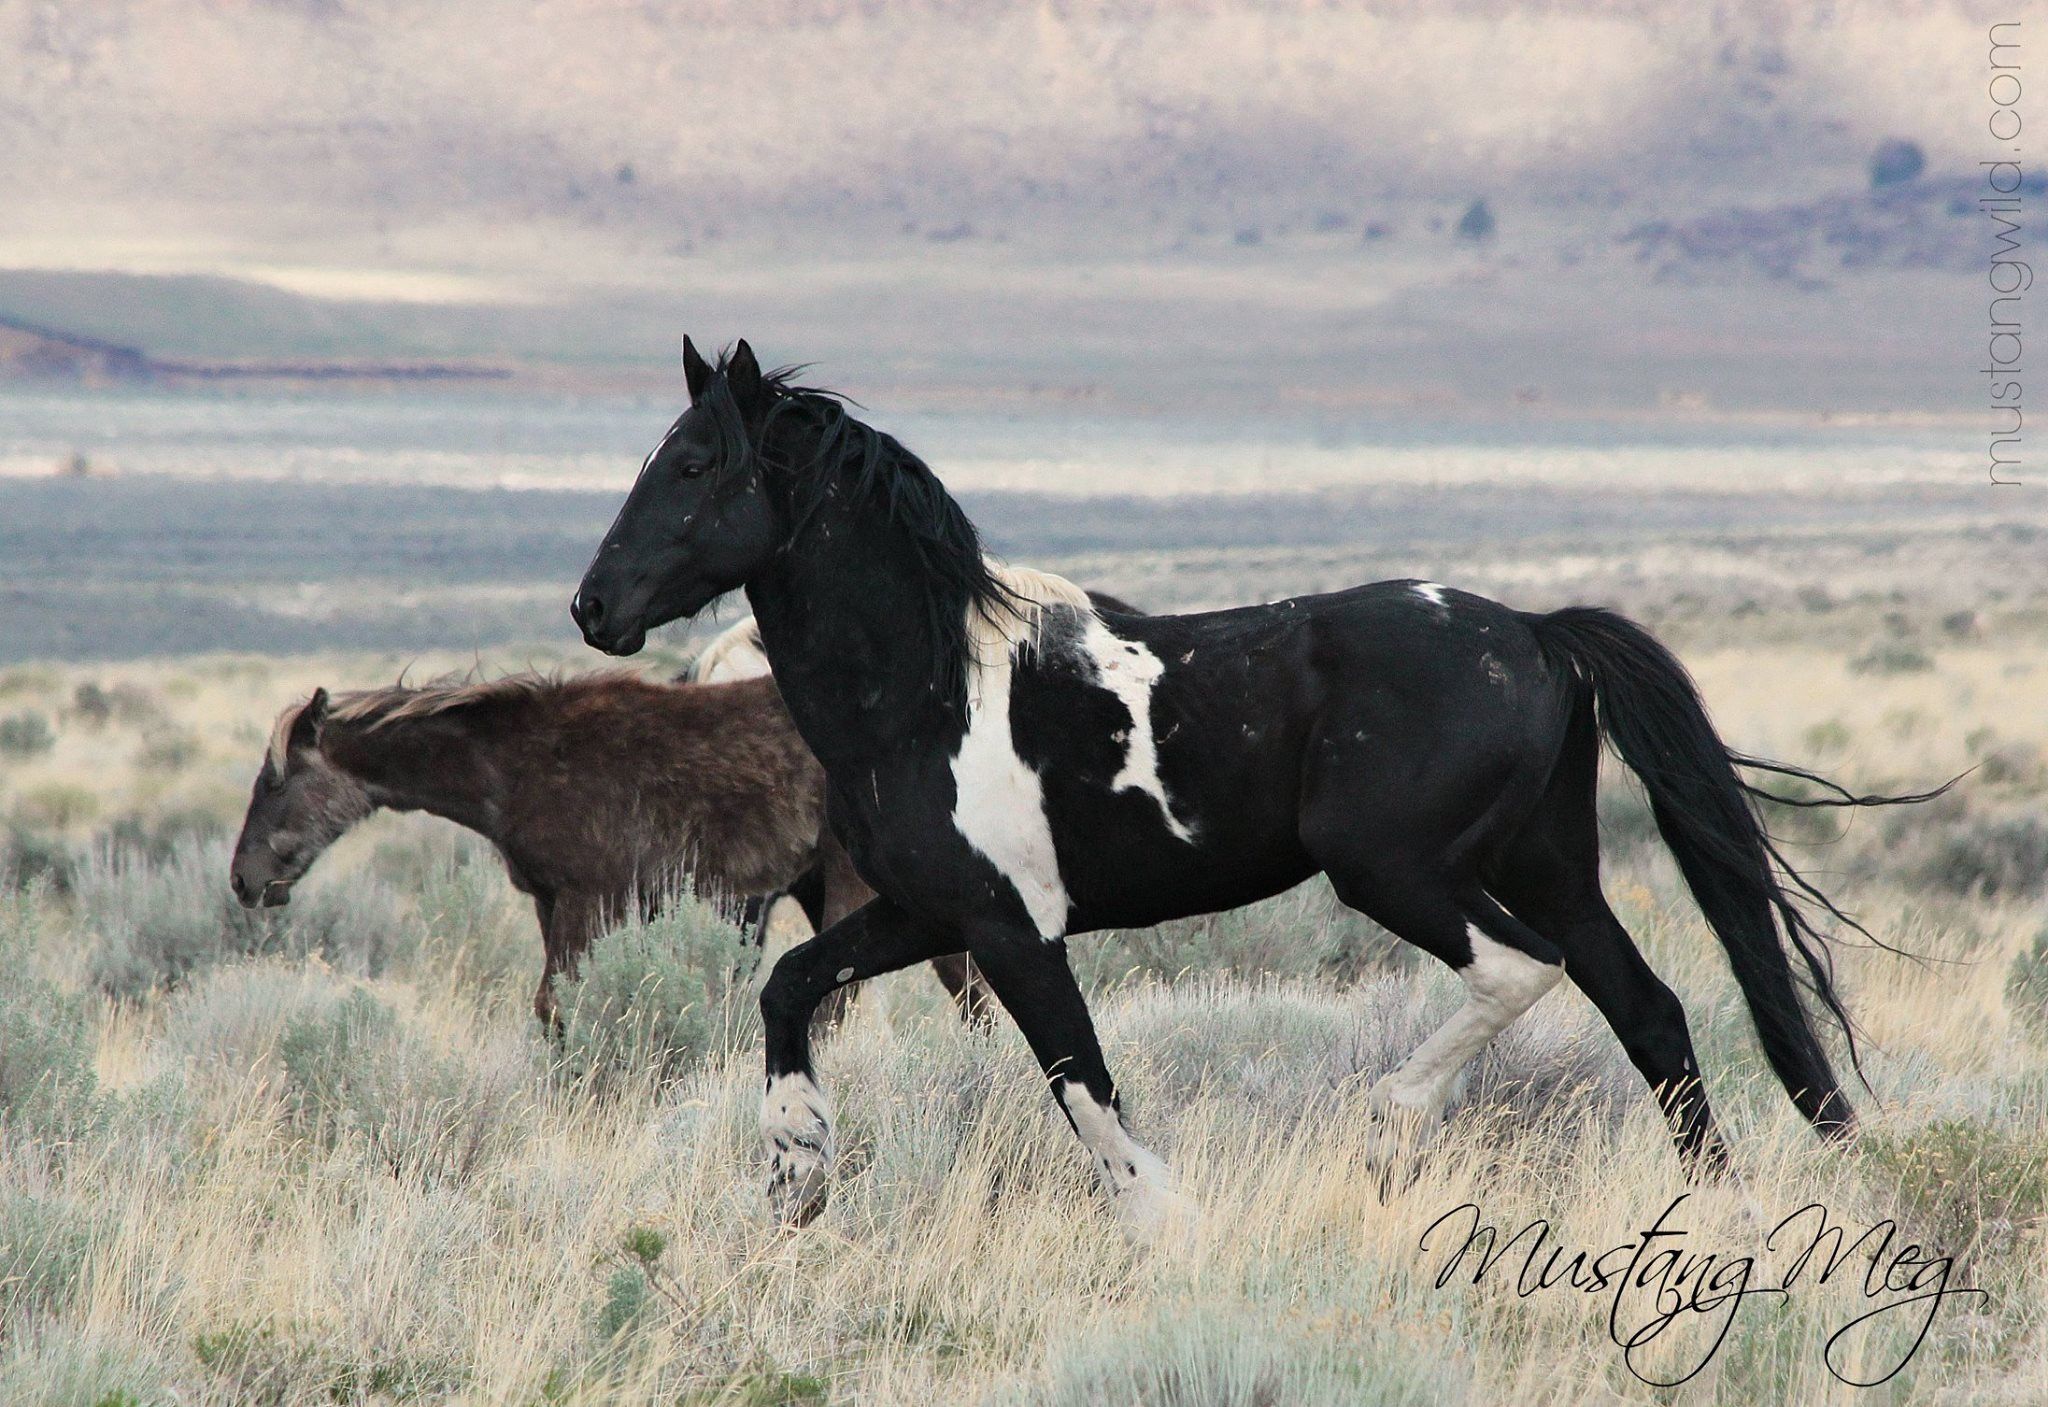 Pin by Mallory M on Mustangs/wild horses | Pinterest | Horse